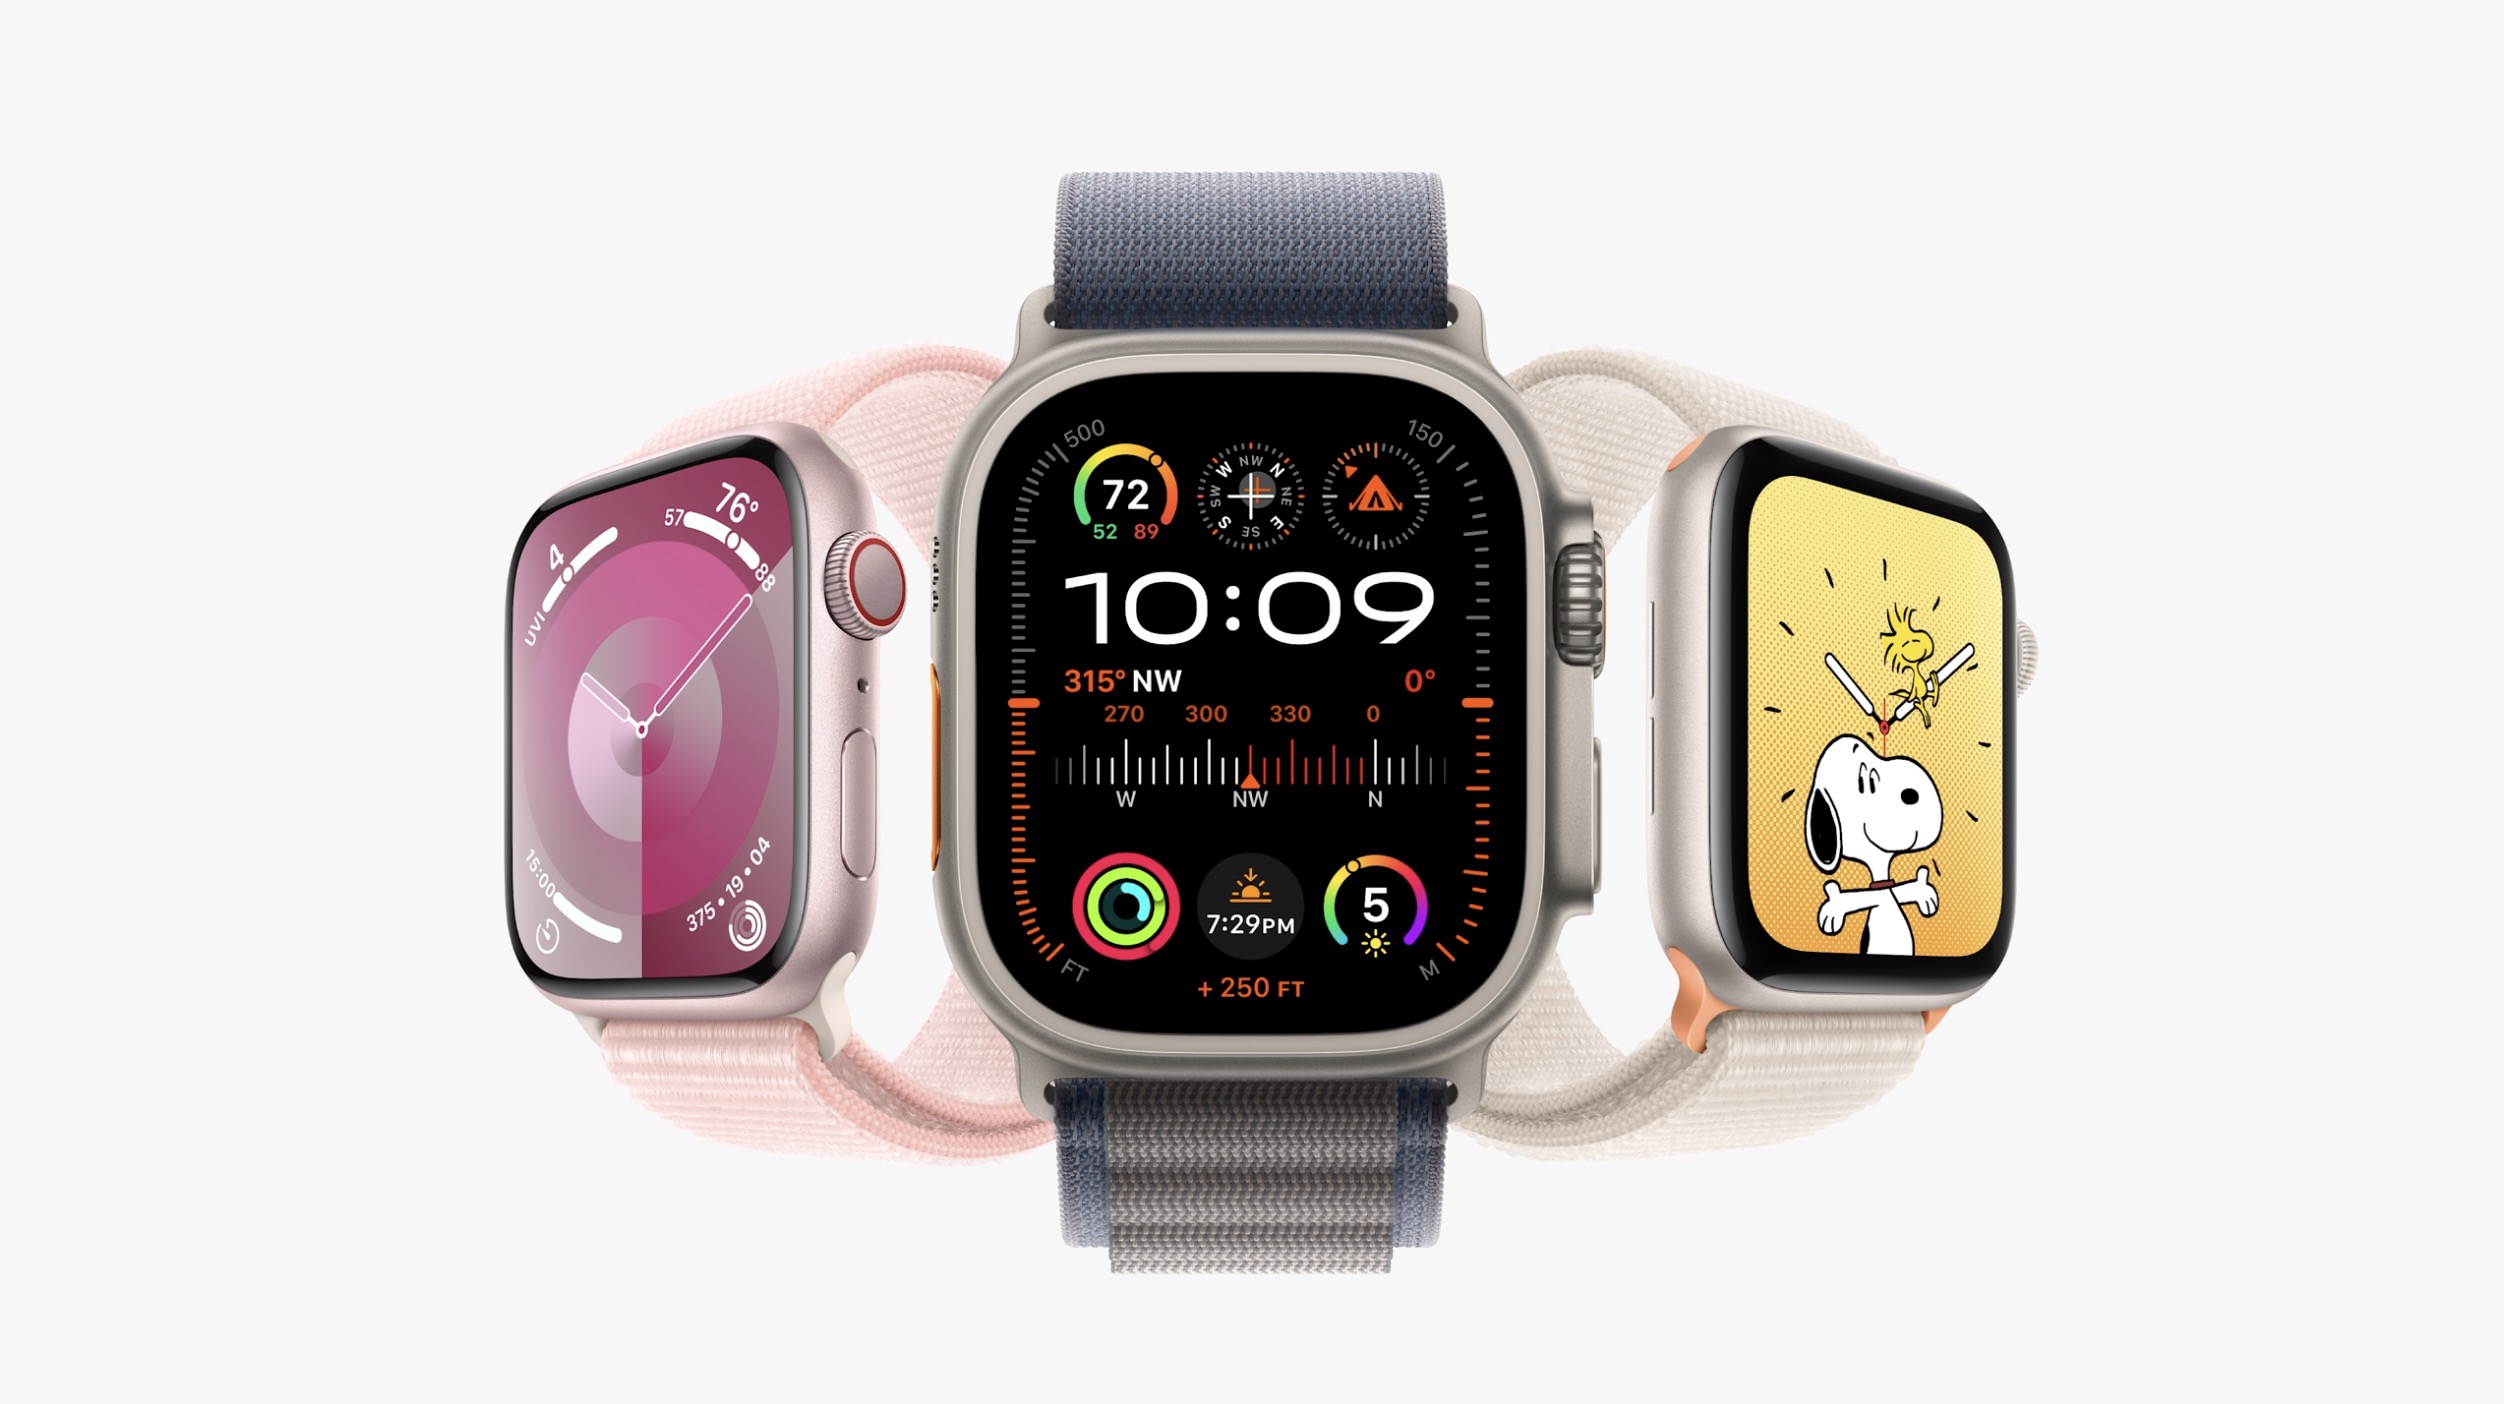 Apple Watch Series 6 review: should you buy it or SE/Series 3? - 9to5Mac